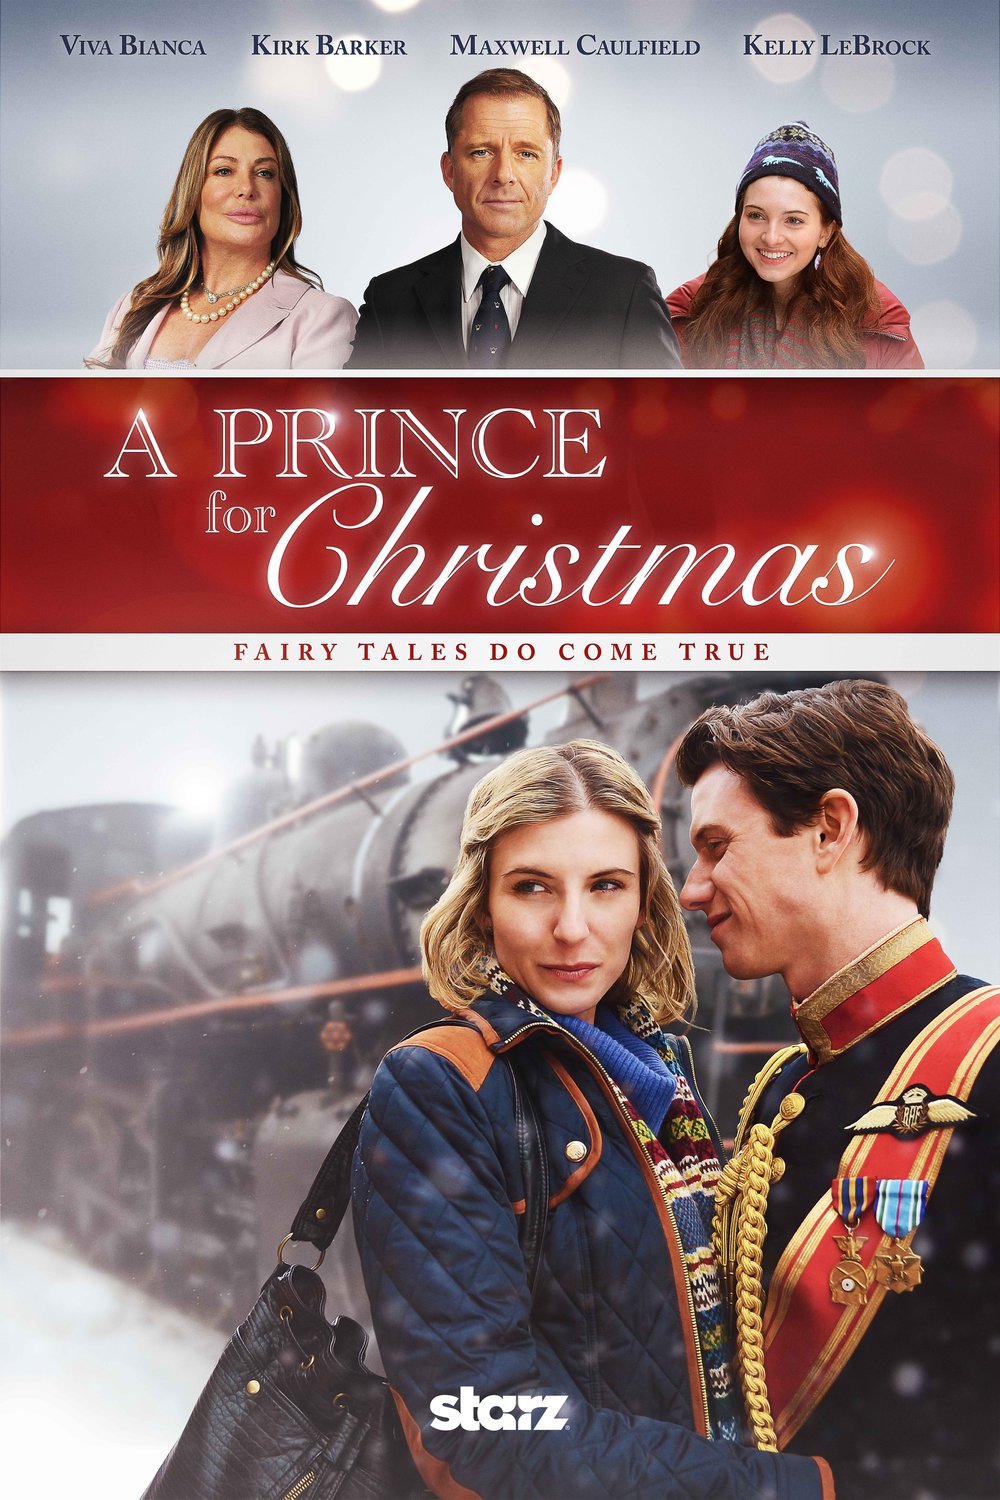 Poster of the movie A Prince for Christmas